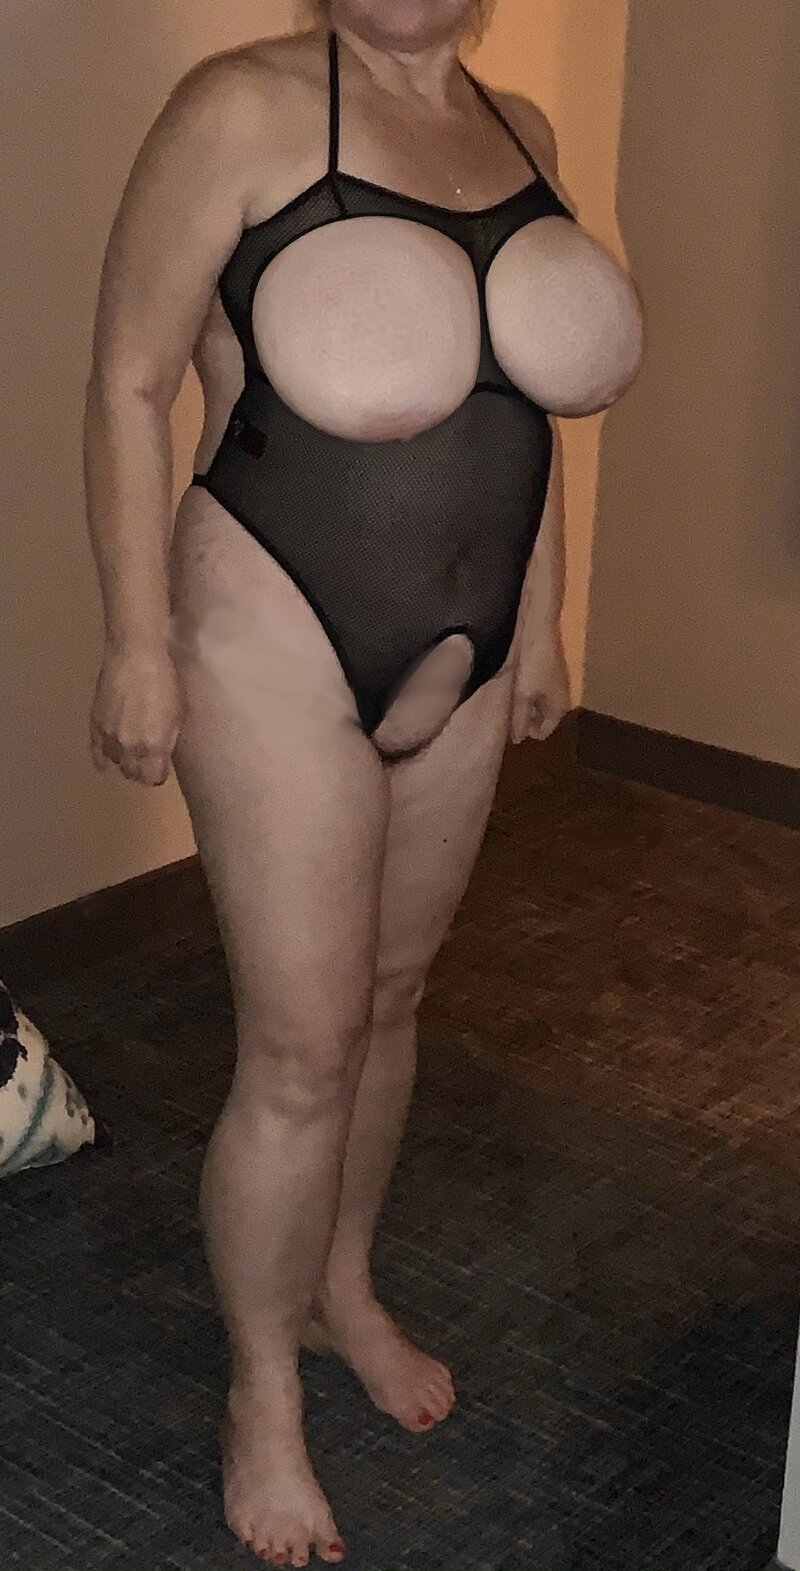 How would you fuck my wife, please describe she wants to know picture